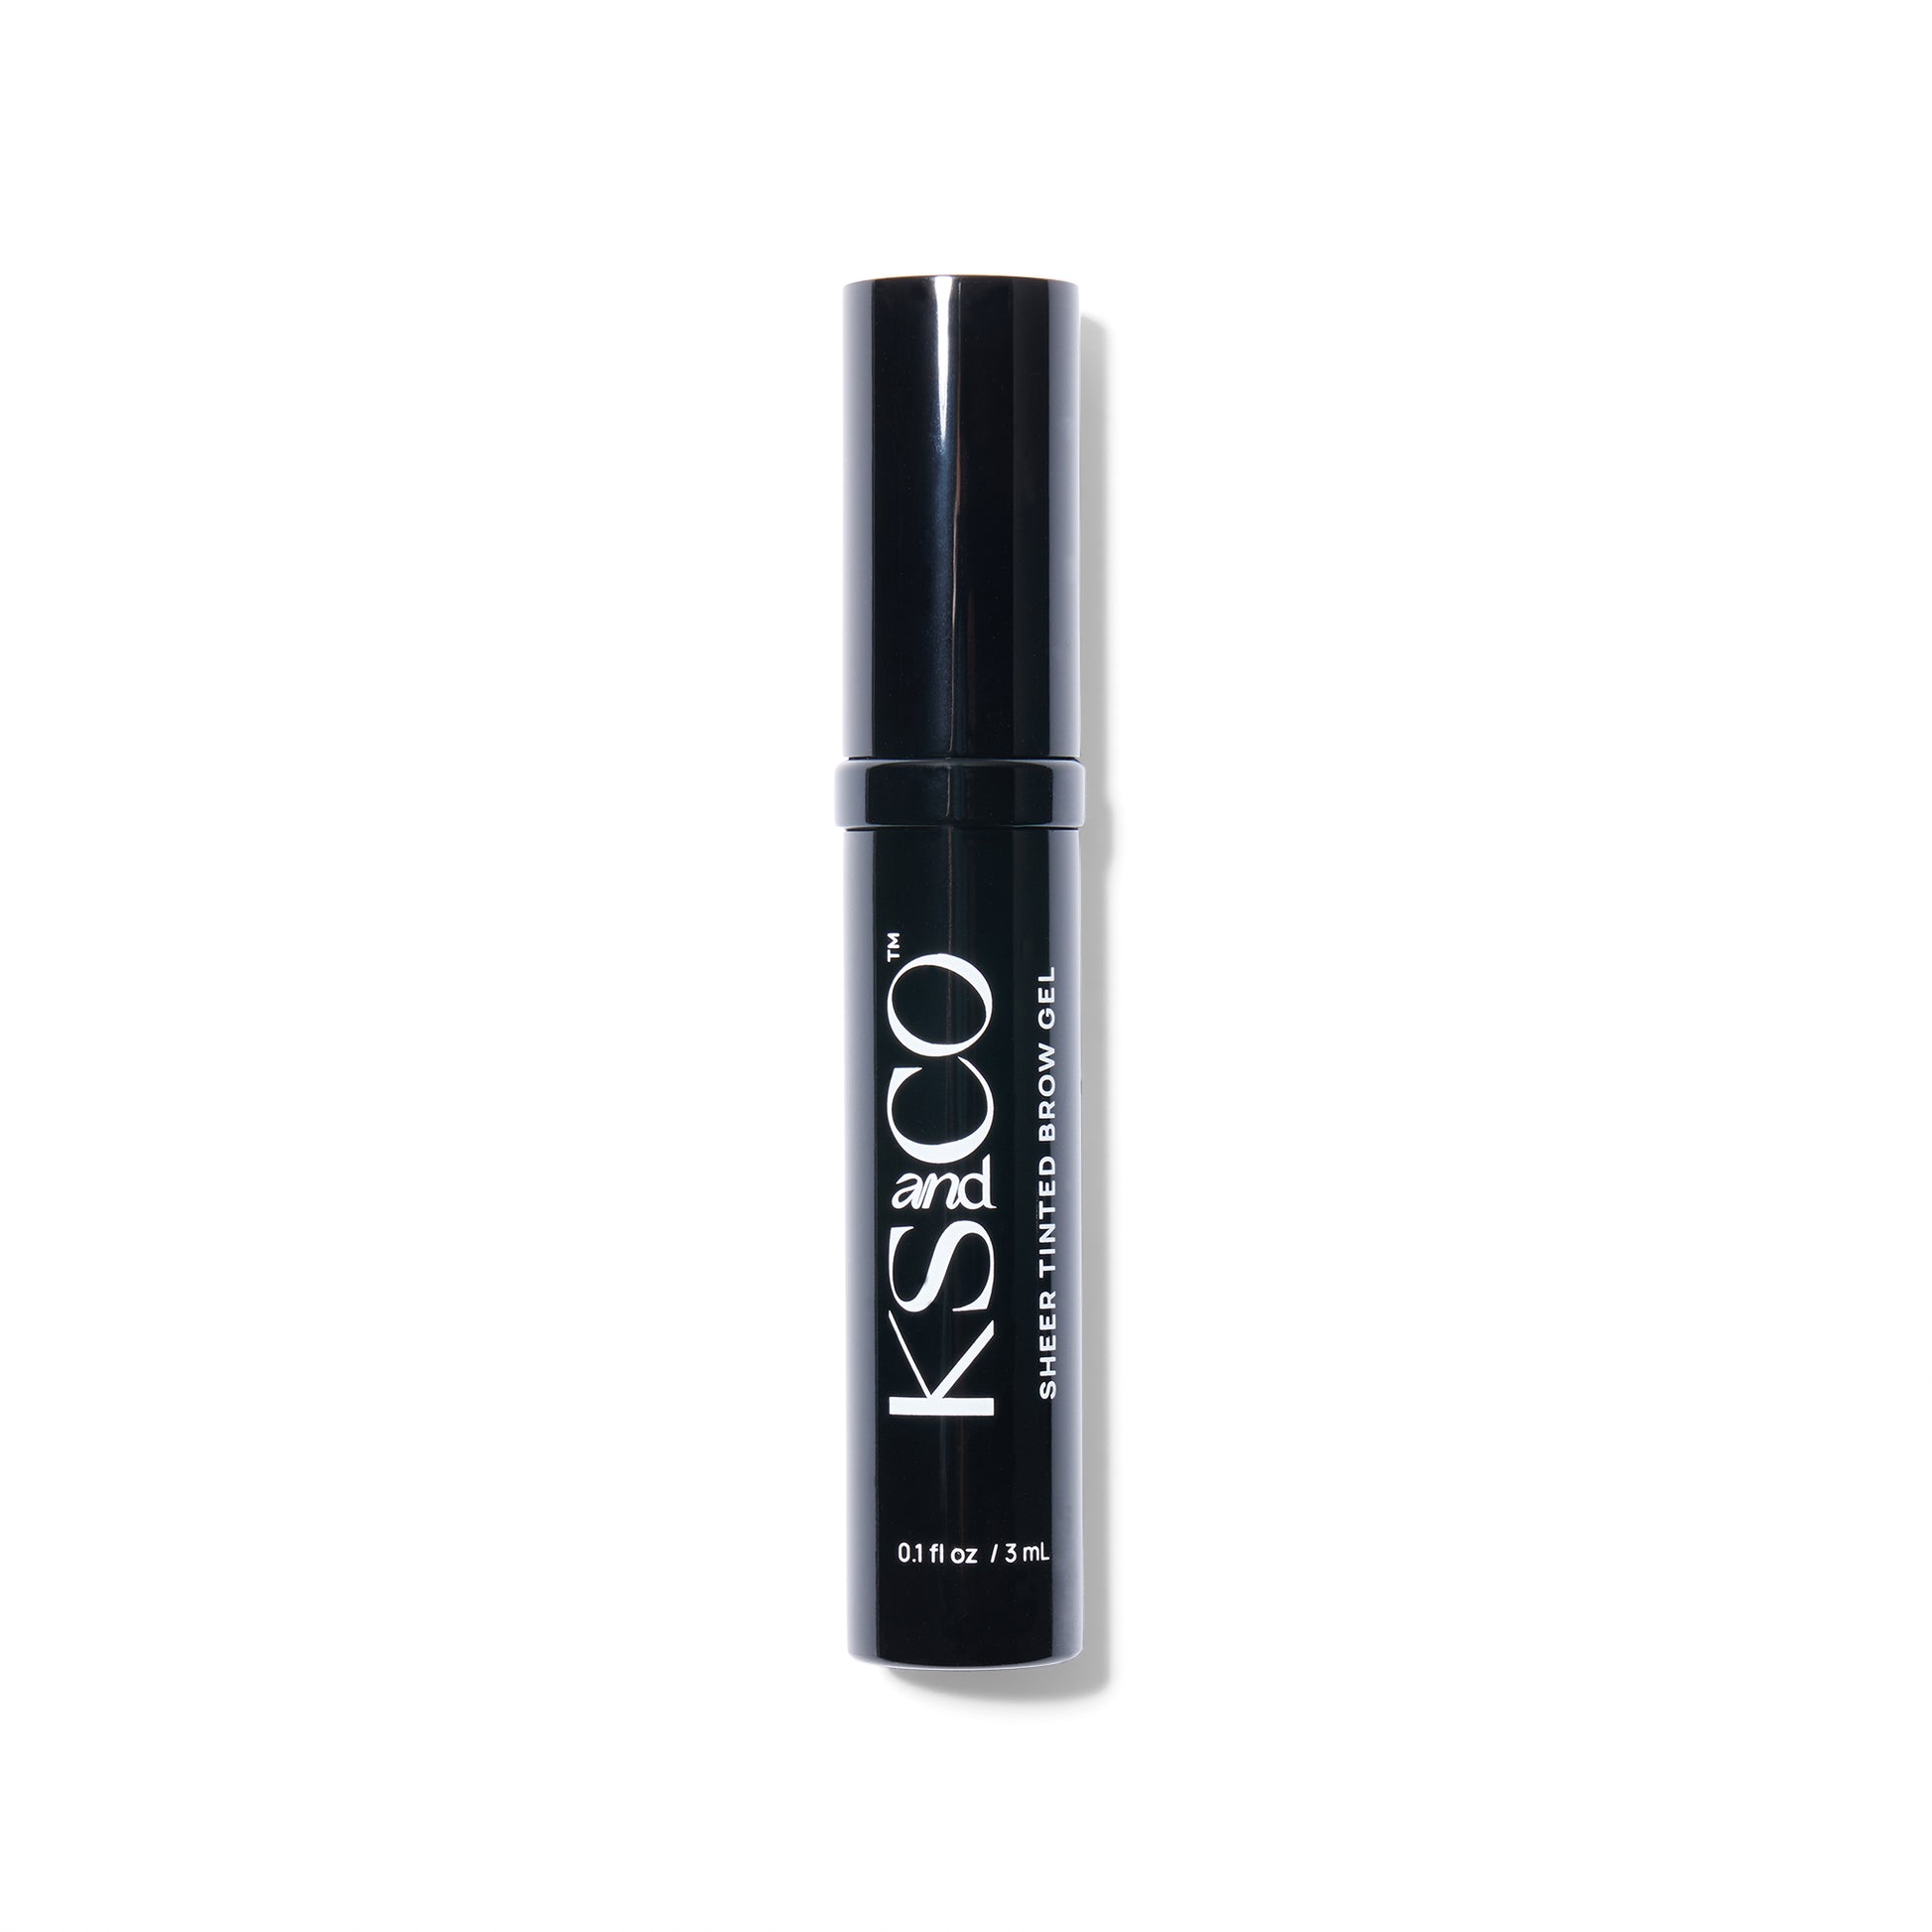 Closed view of the black metal tube of the KS&CO Sheer Tinted Brow Gel. 